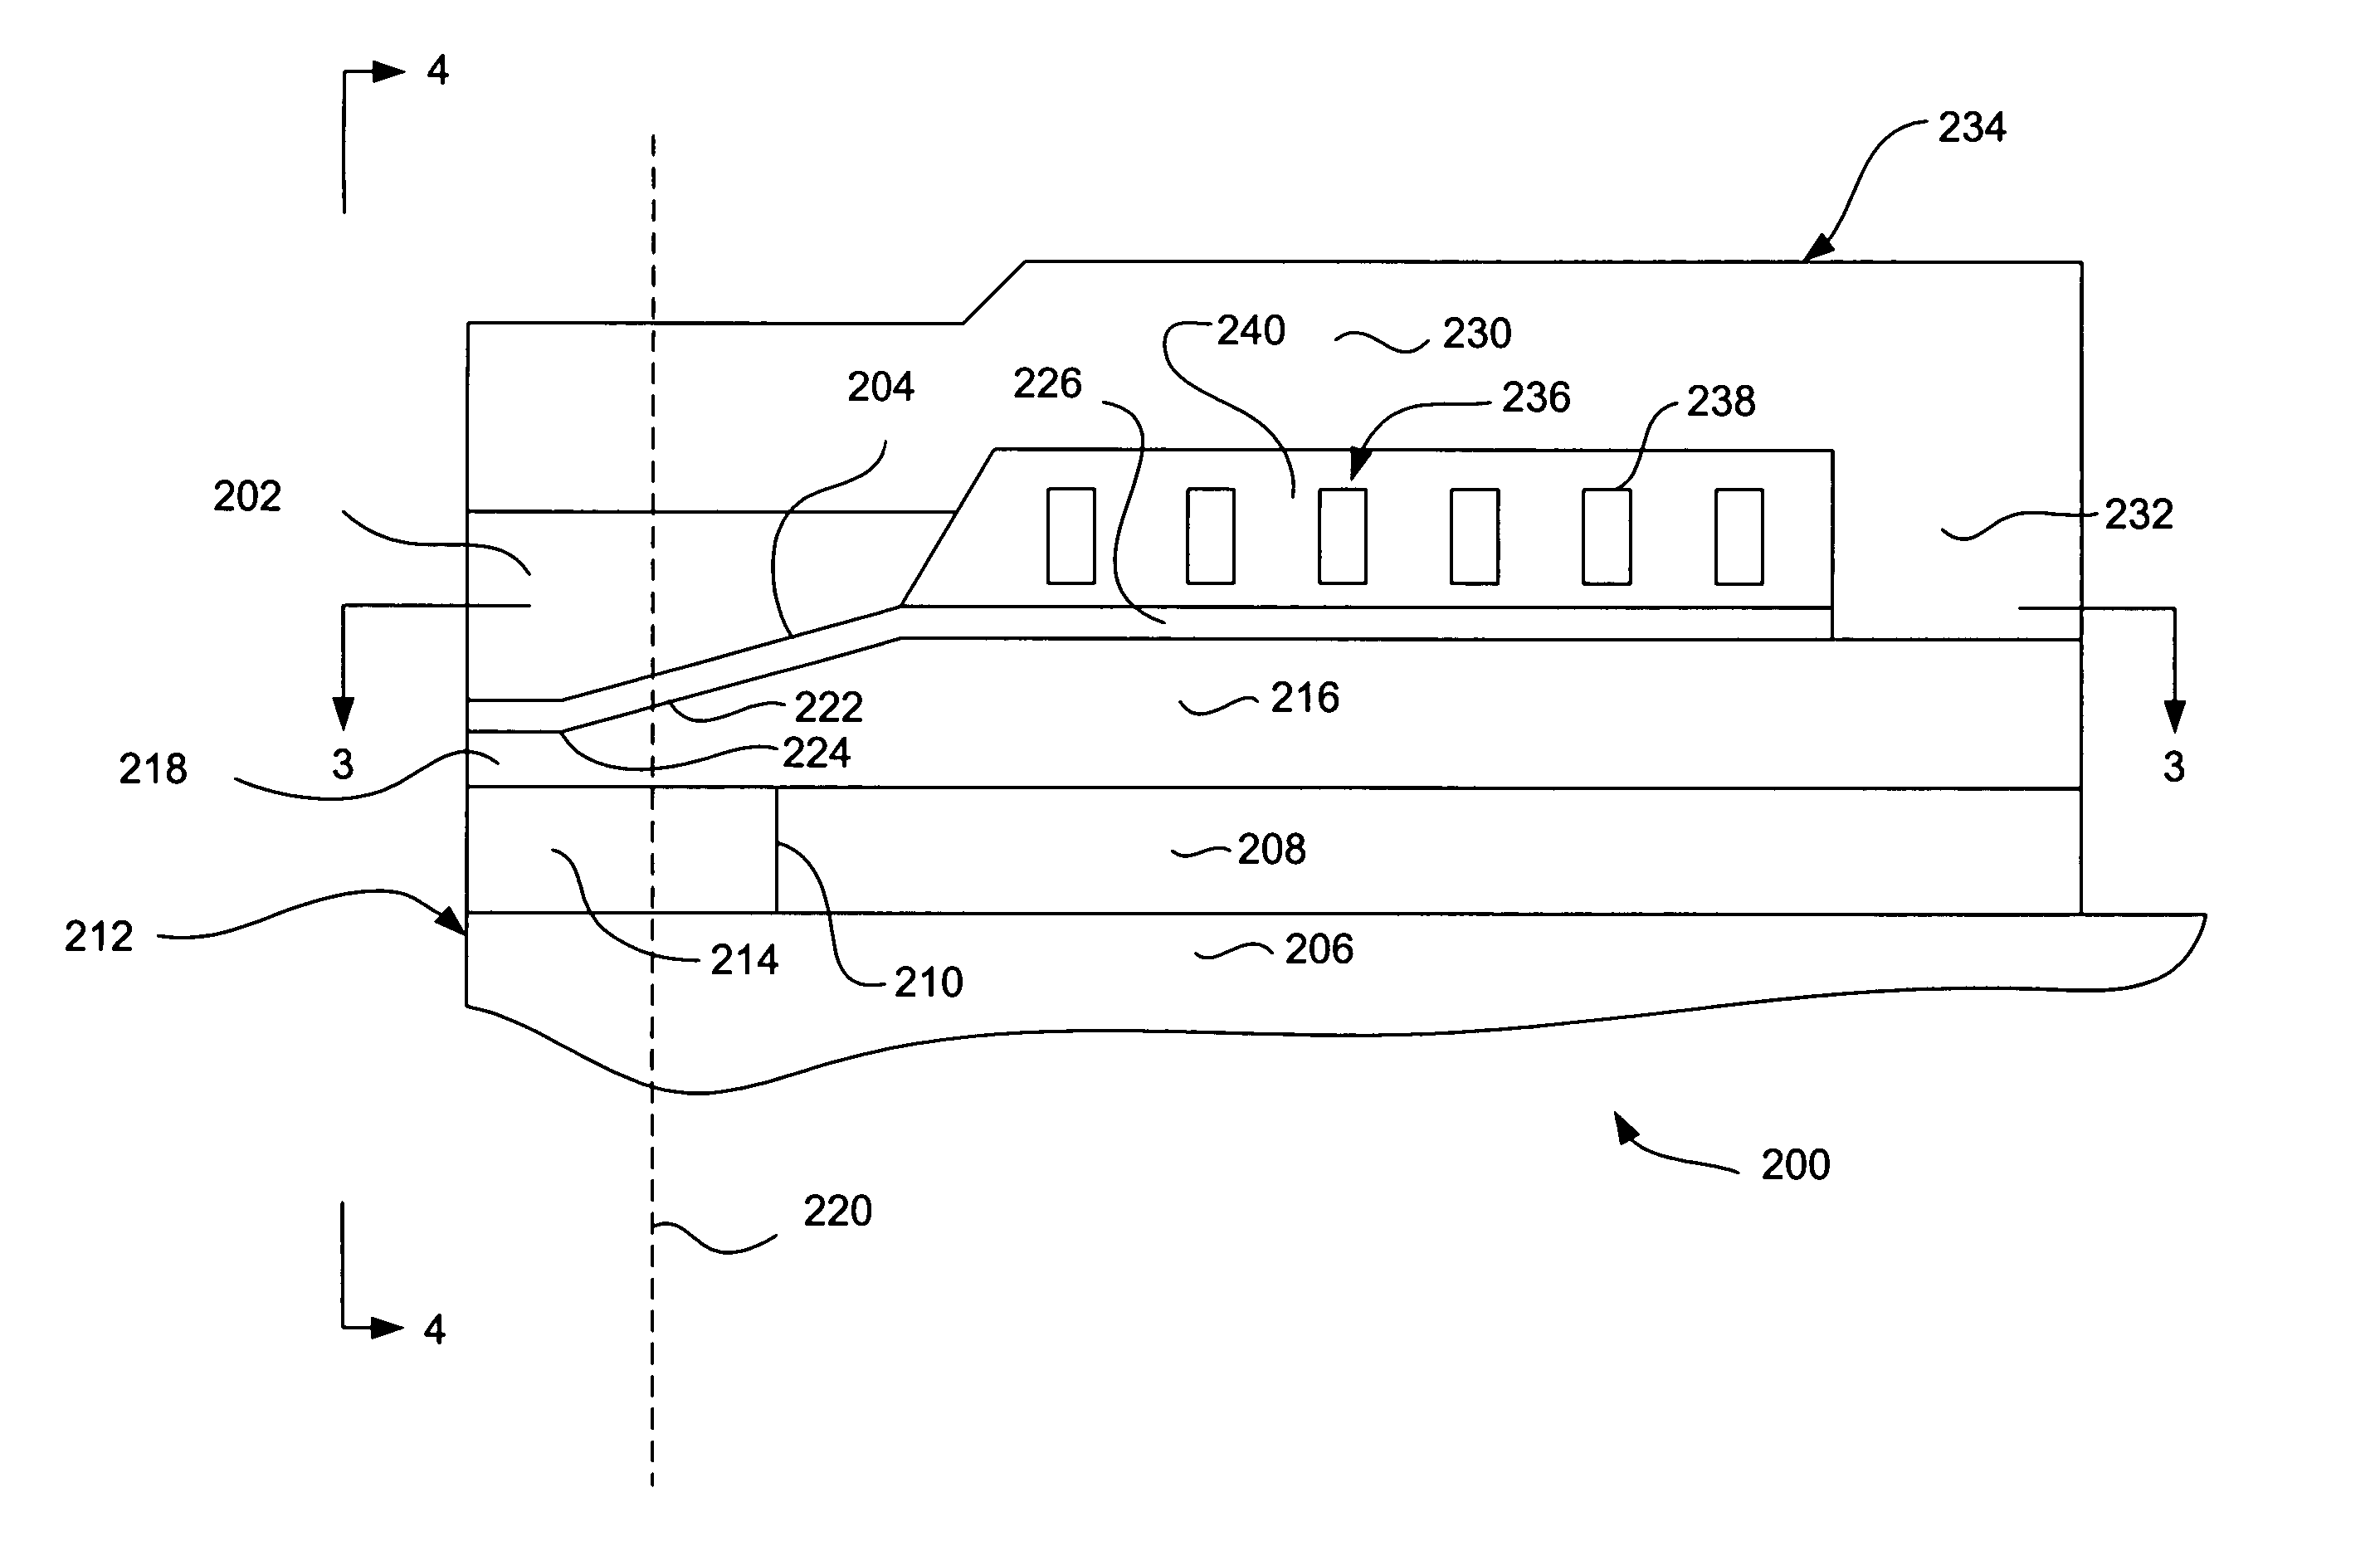 Trailing edge taper design and method for making a perpendicular write head with shielding